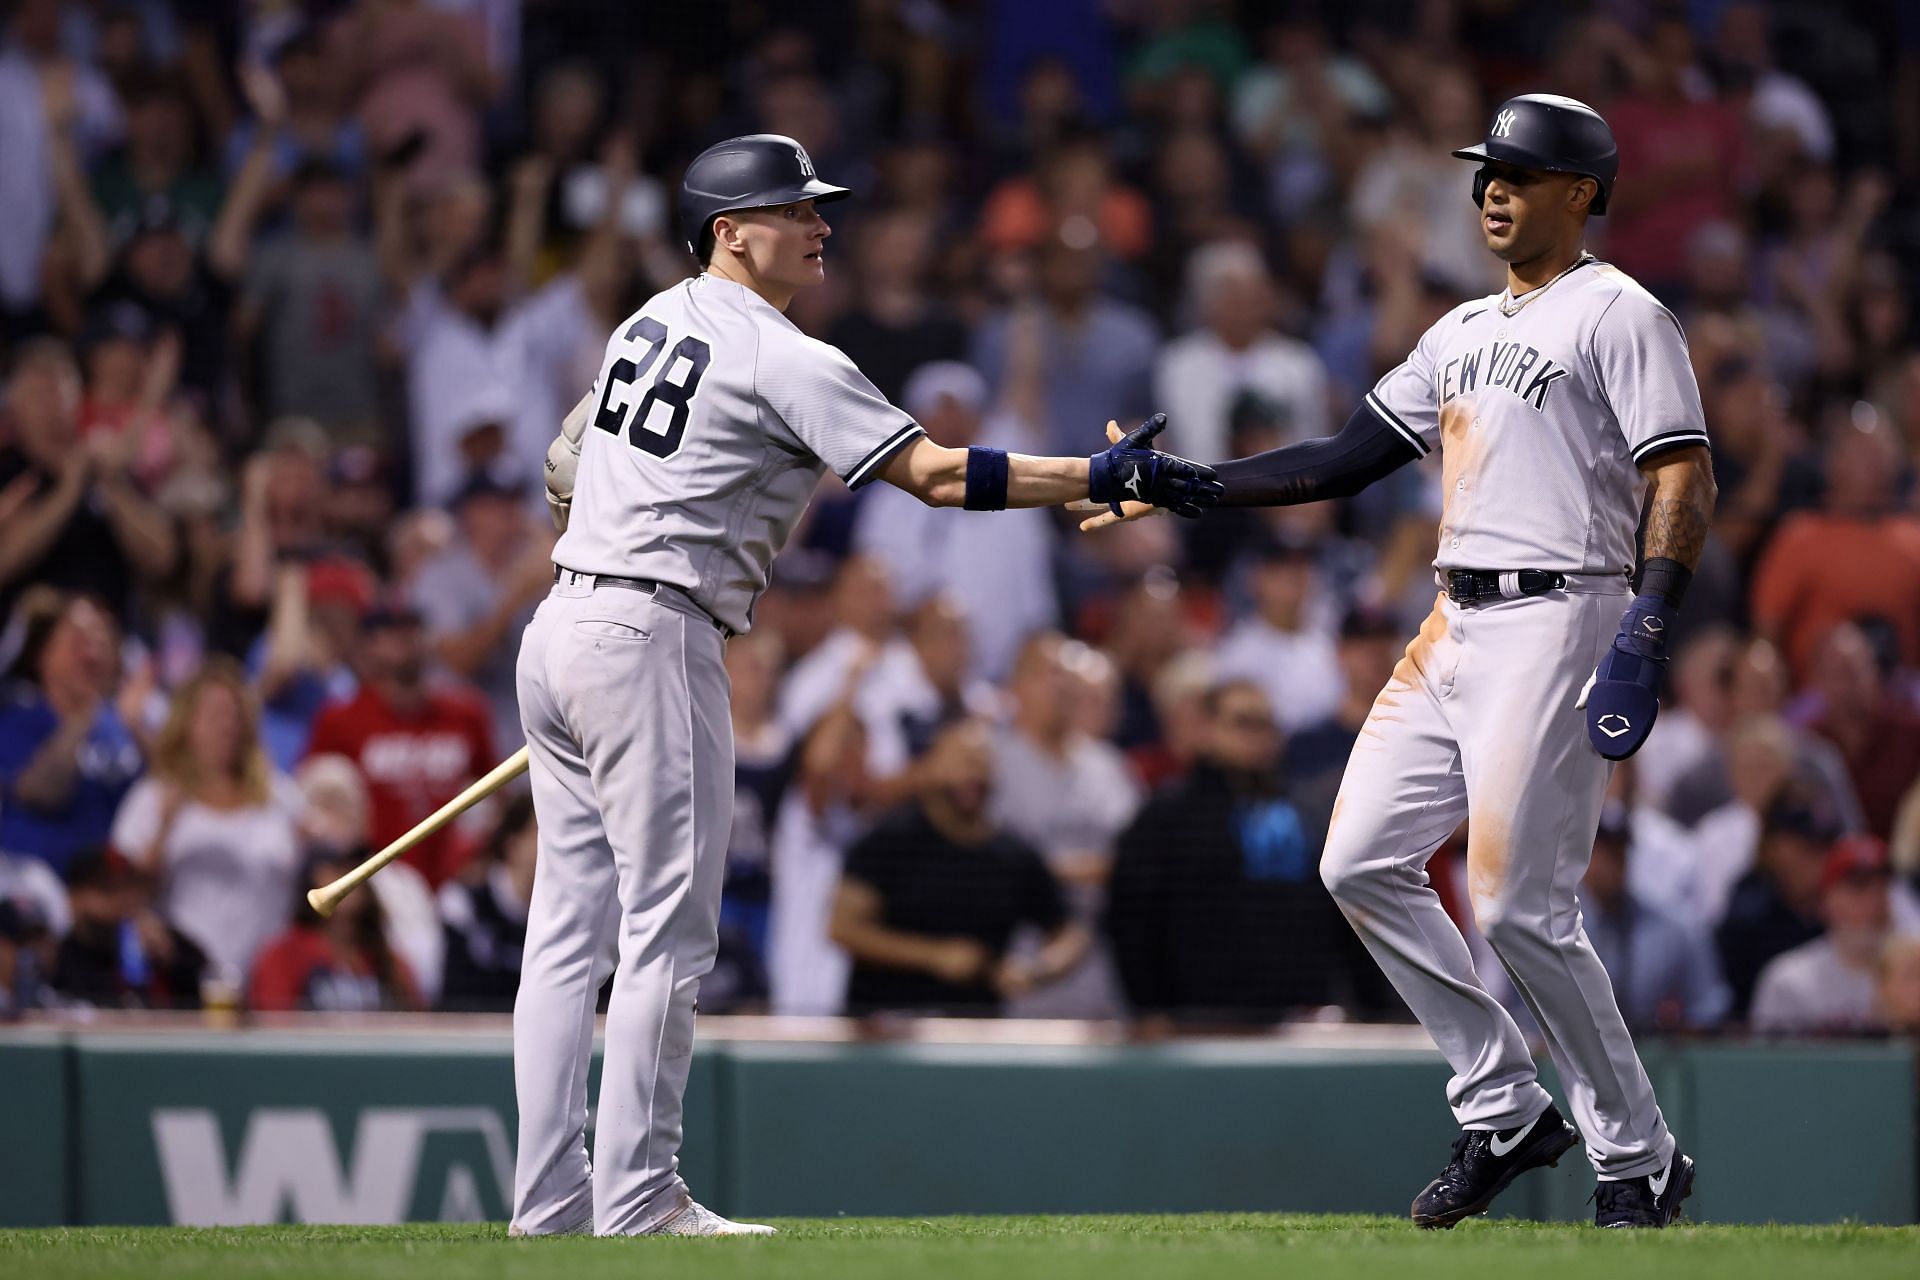 Aaron Hicks celebrates with Josh Donaldson after scoring a run at Fenway Park